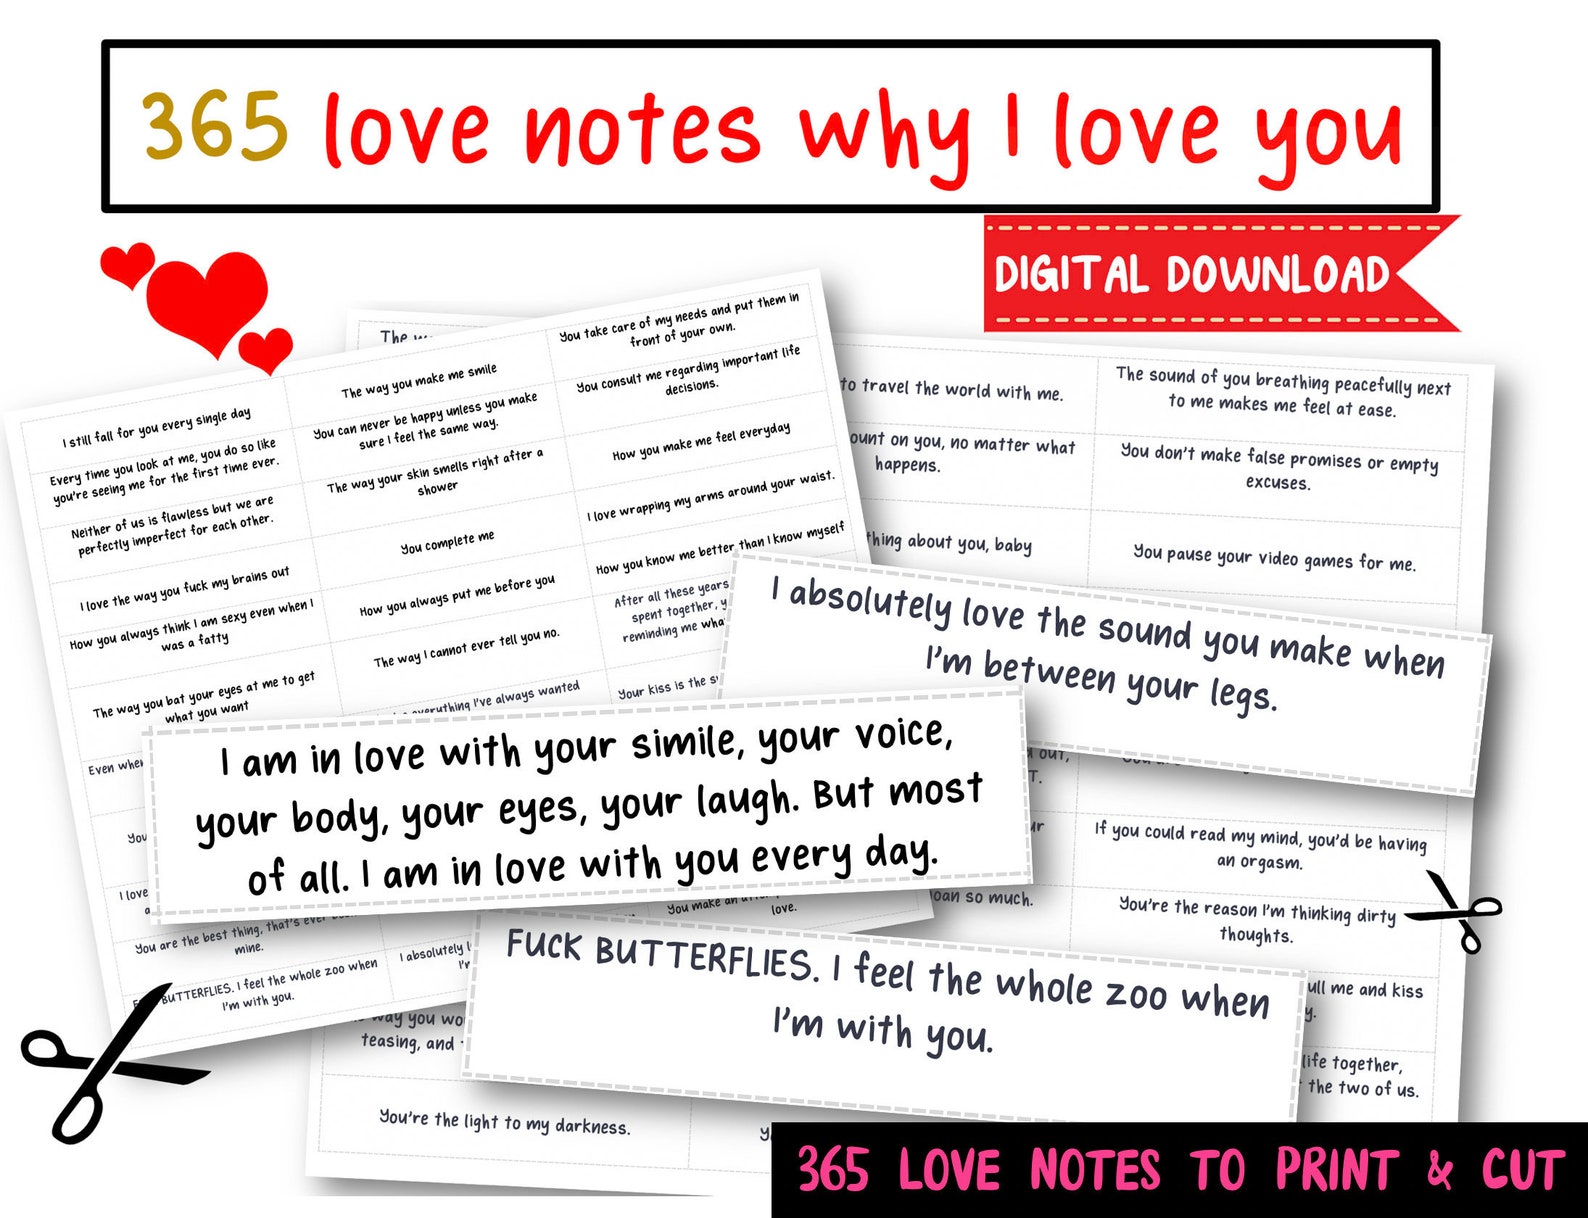 365 Days of Love Notes and 365 Reasons Why I Love You Etsy